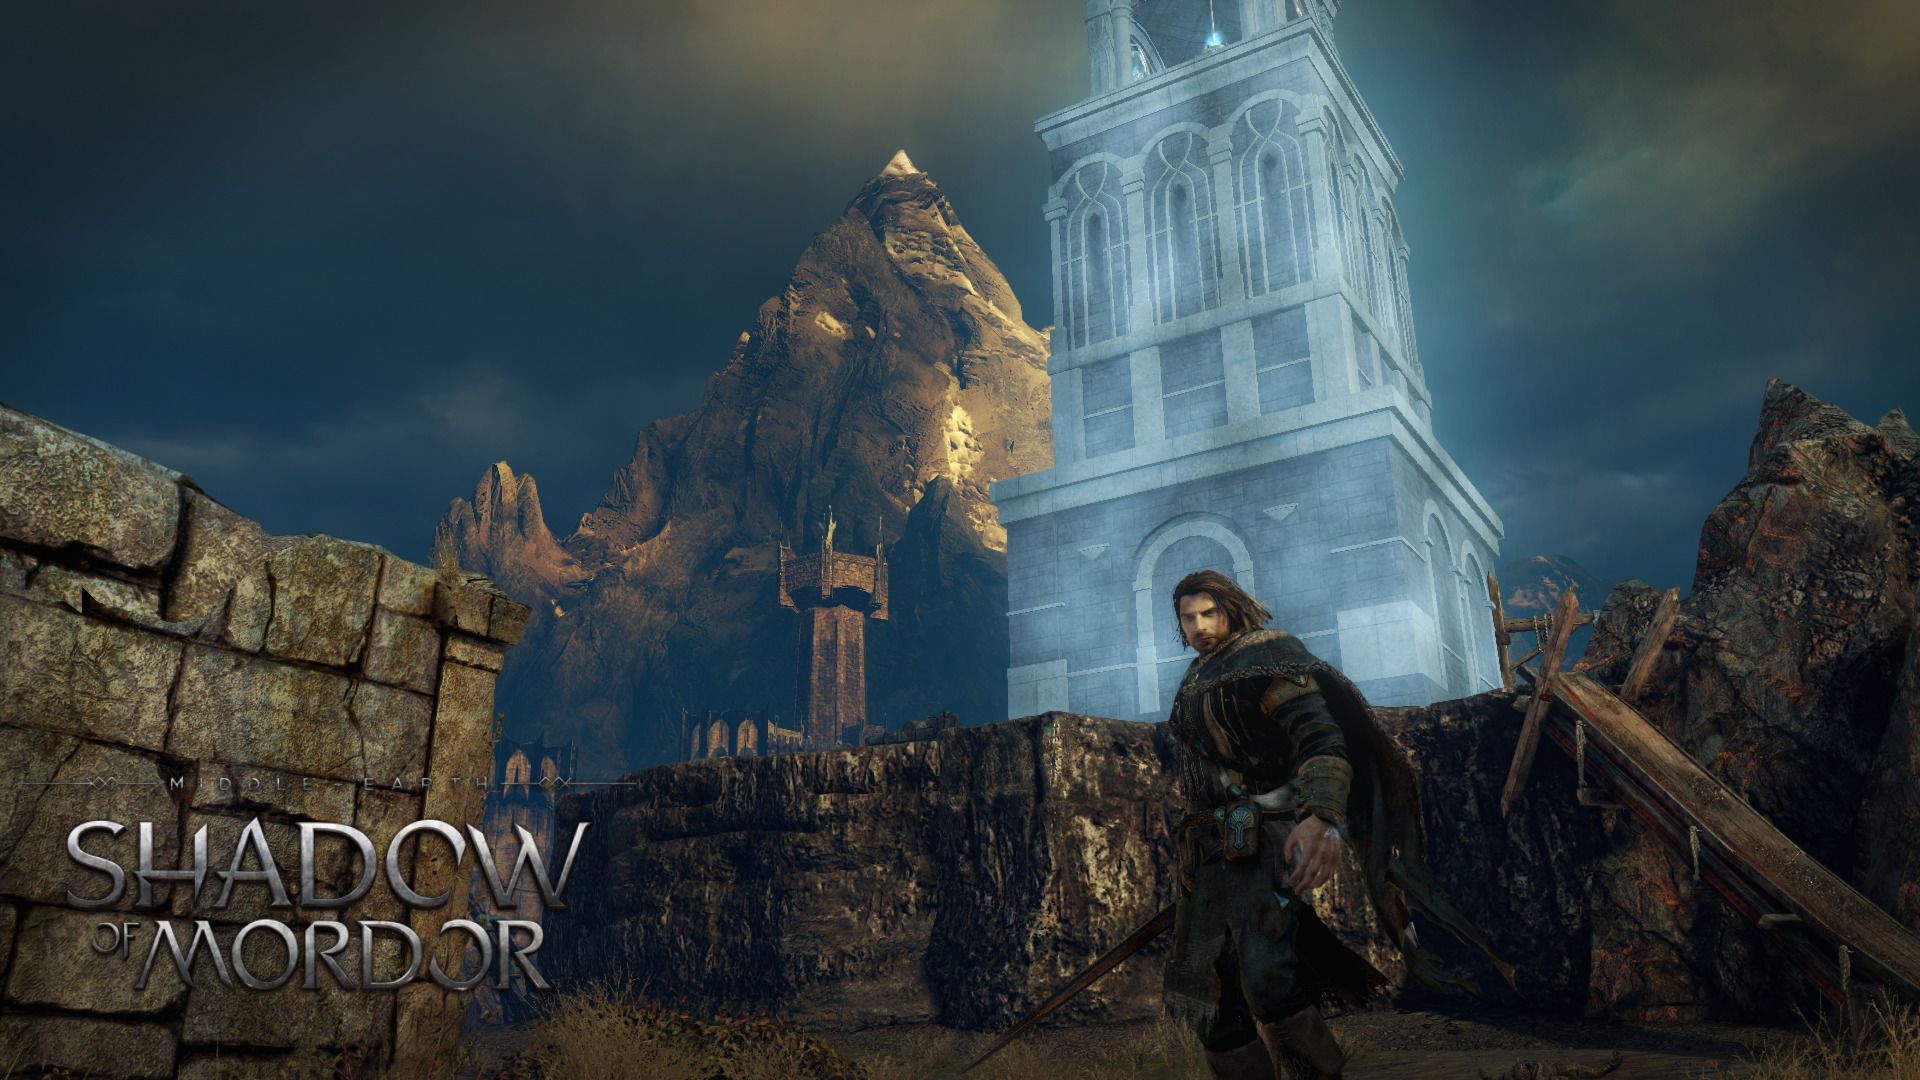 1920x1080 shadow of mordor background